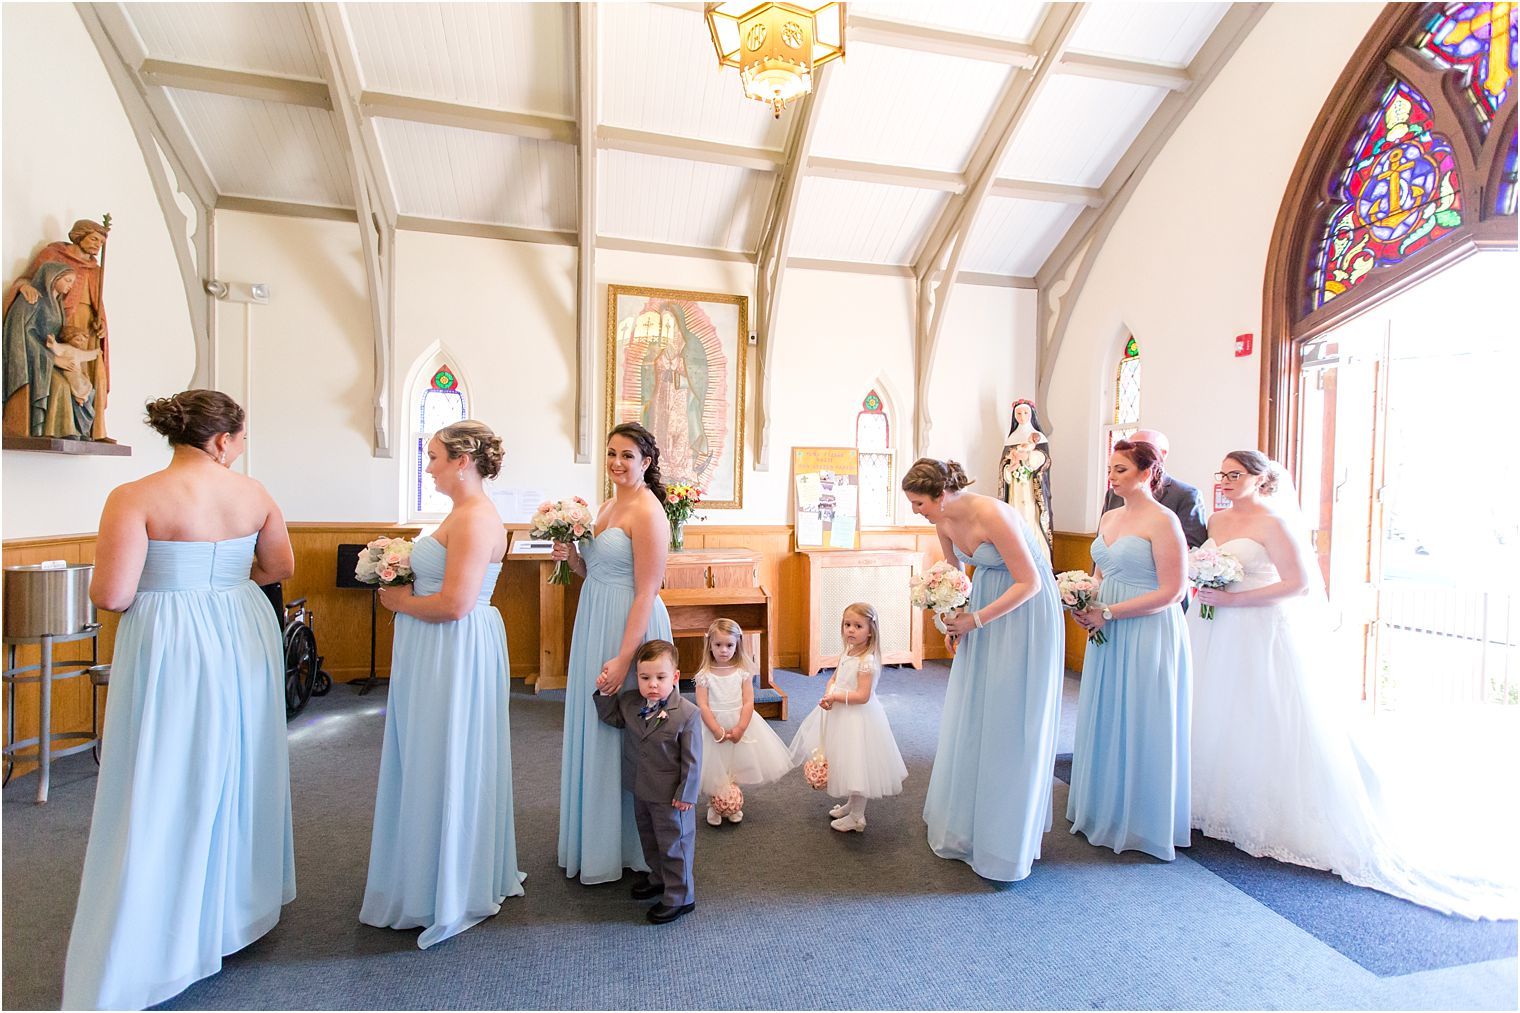 Wedding ceremony at St. Rose of Lima Church in Freehold